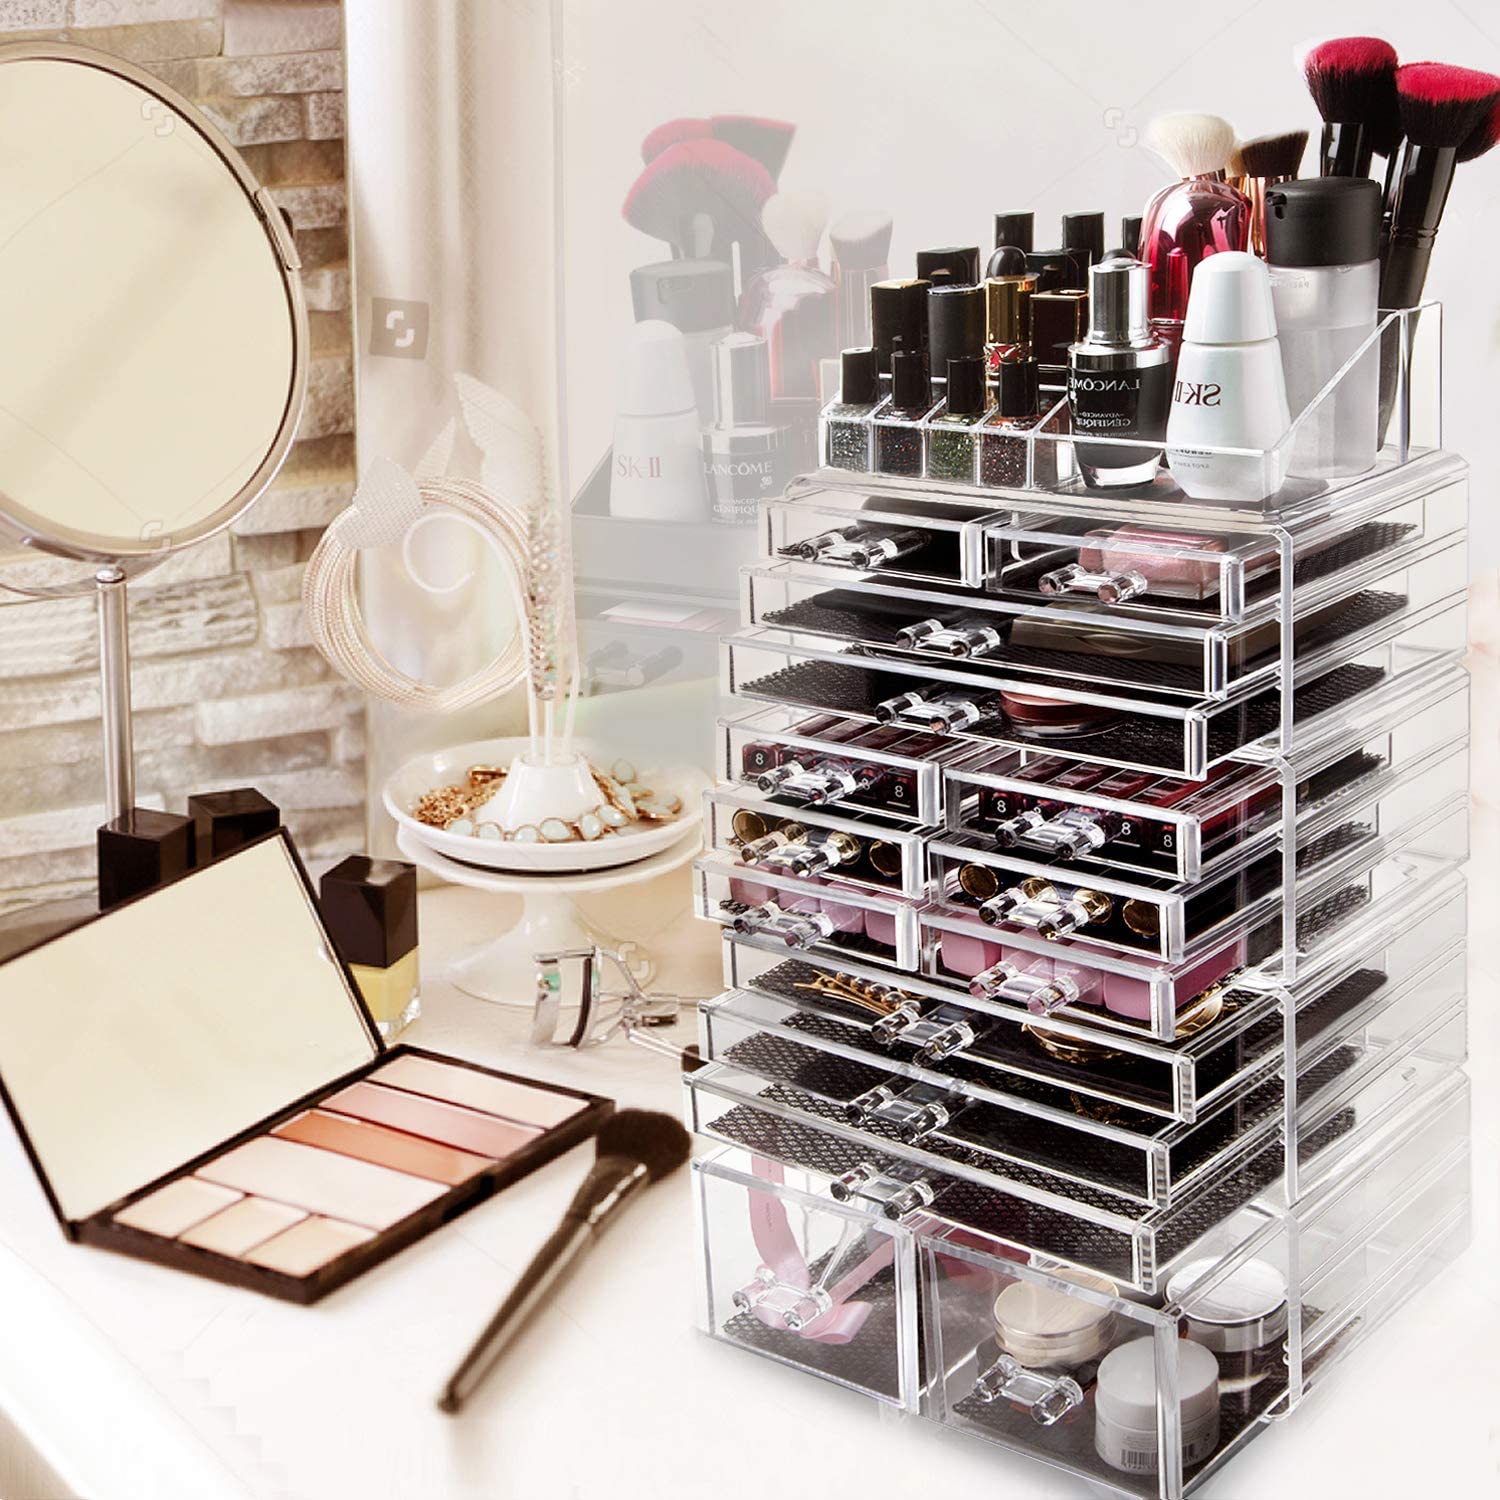 HBlife Makeup Organizer 5 Pieces Acrylic Cosmetic Storage Drawers and Jewelry Display Box, Large